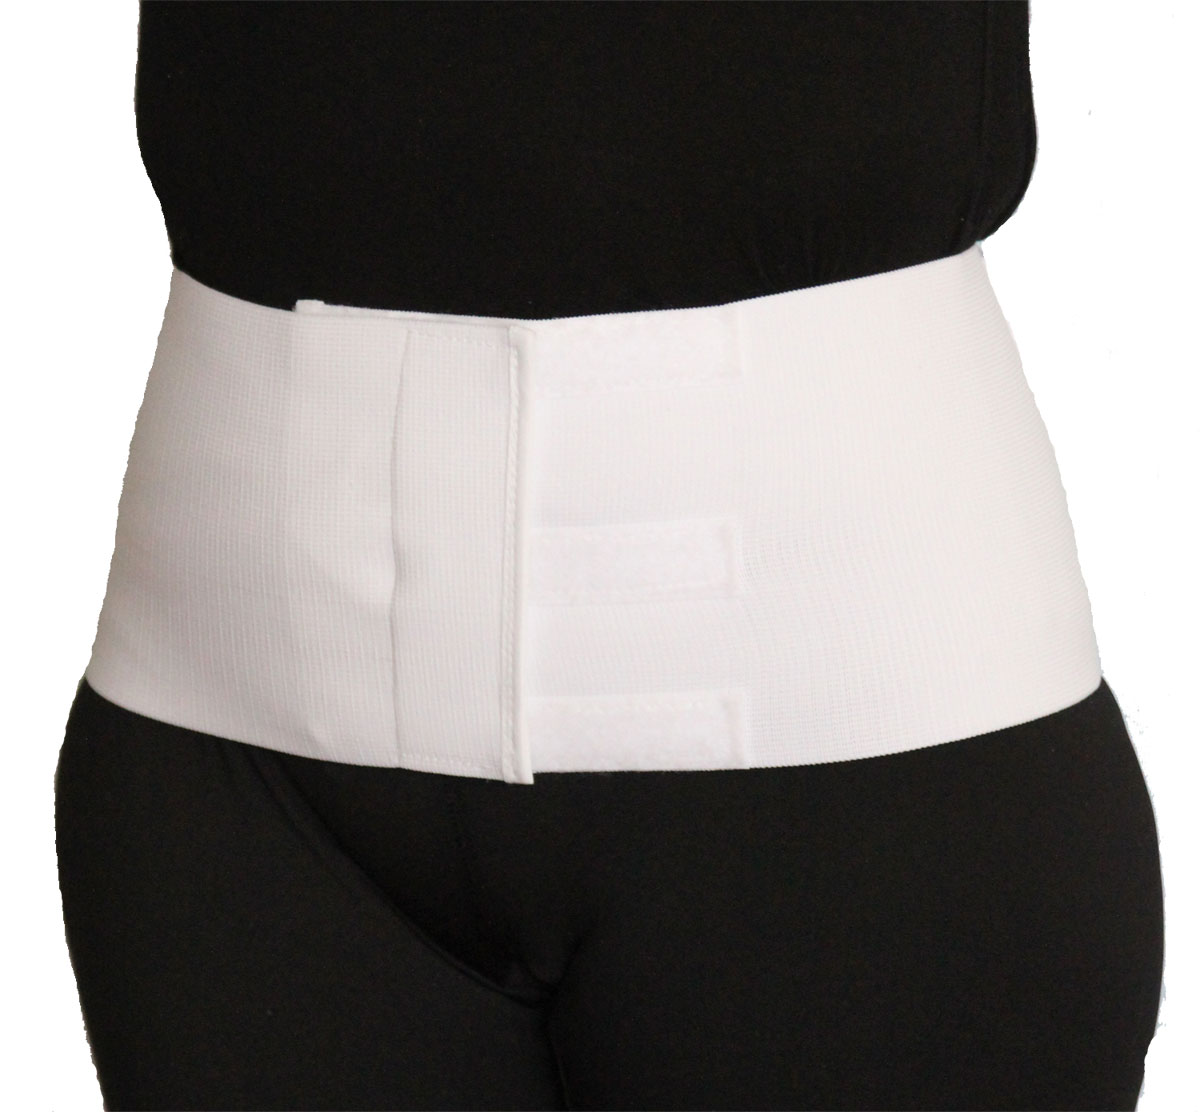 Belly Binders For Core Healing: Who Needs One & Who Doesn't?